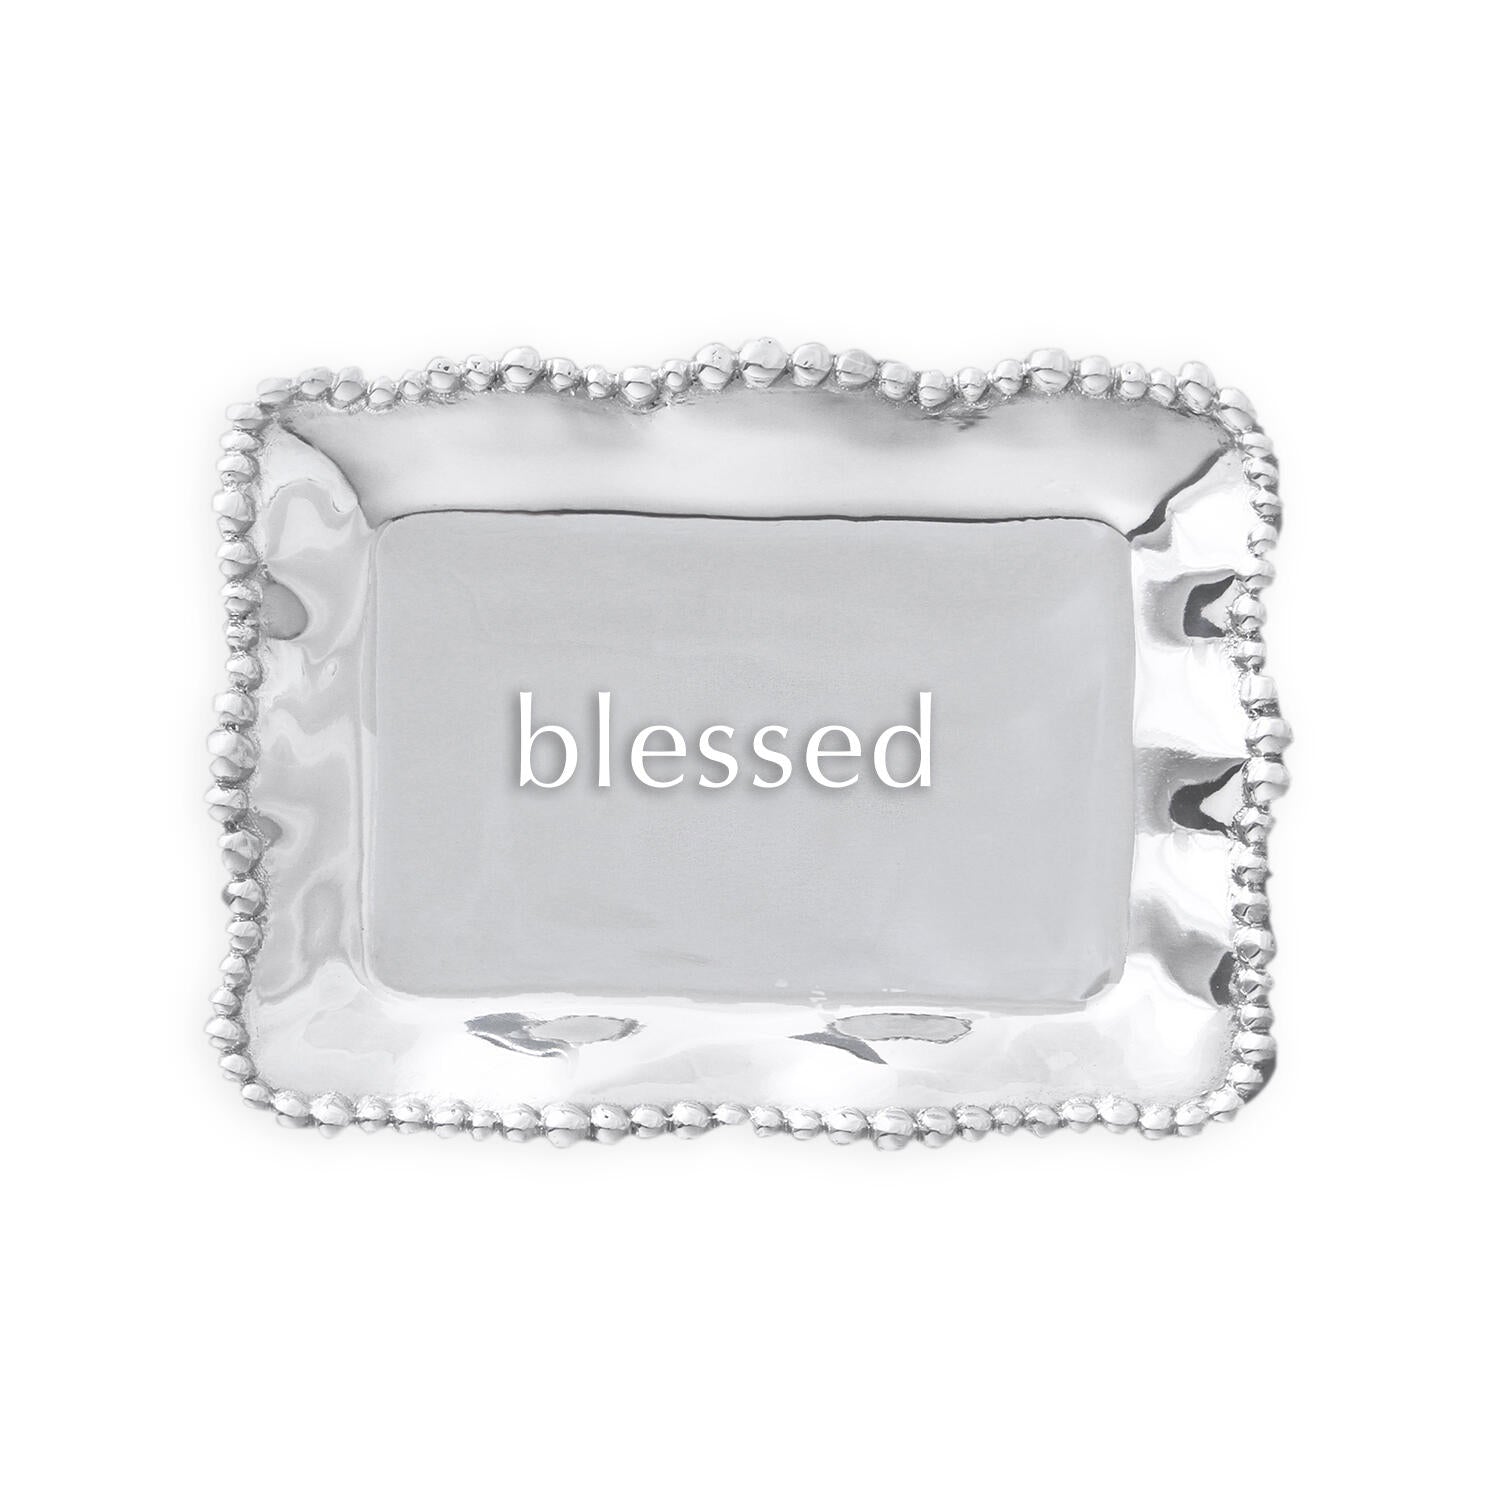 GIFTABLES Organic Pearl Rectangular Engraved Tray - blessed